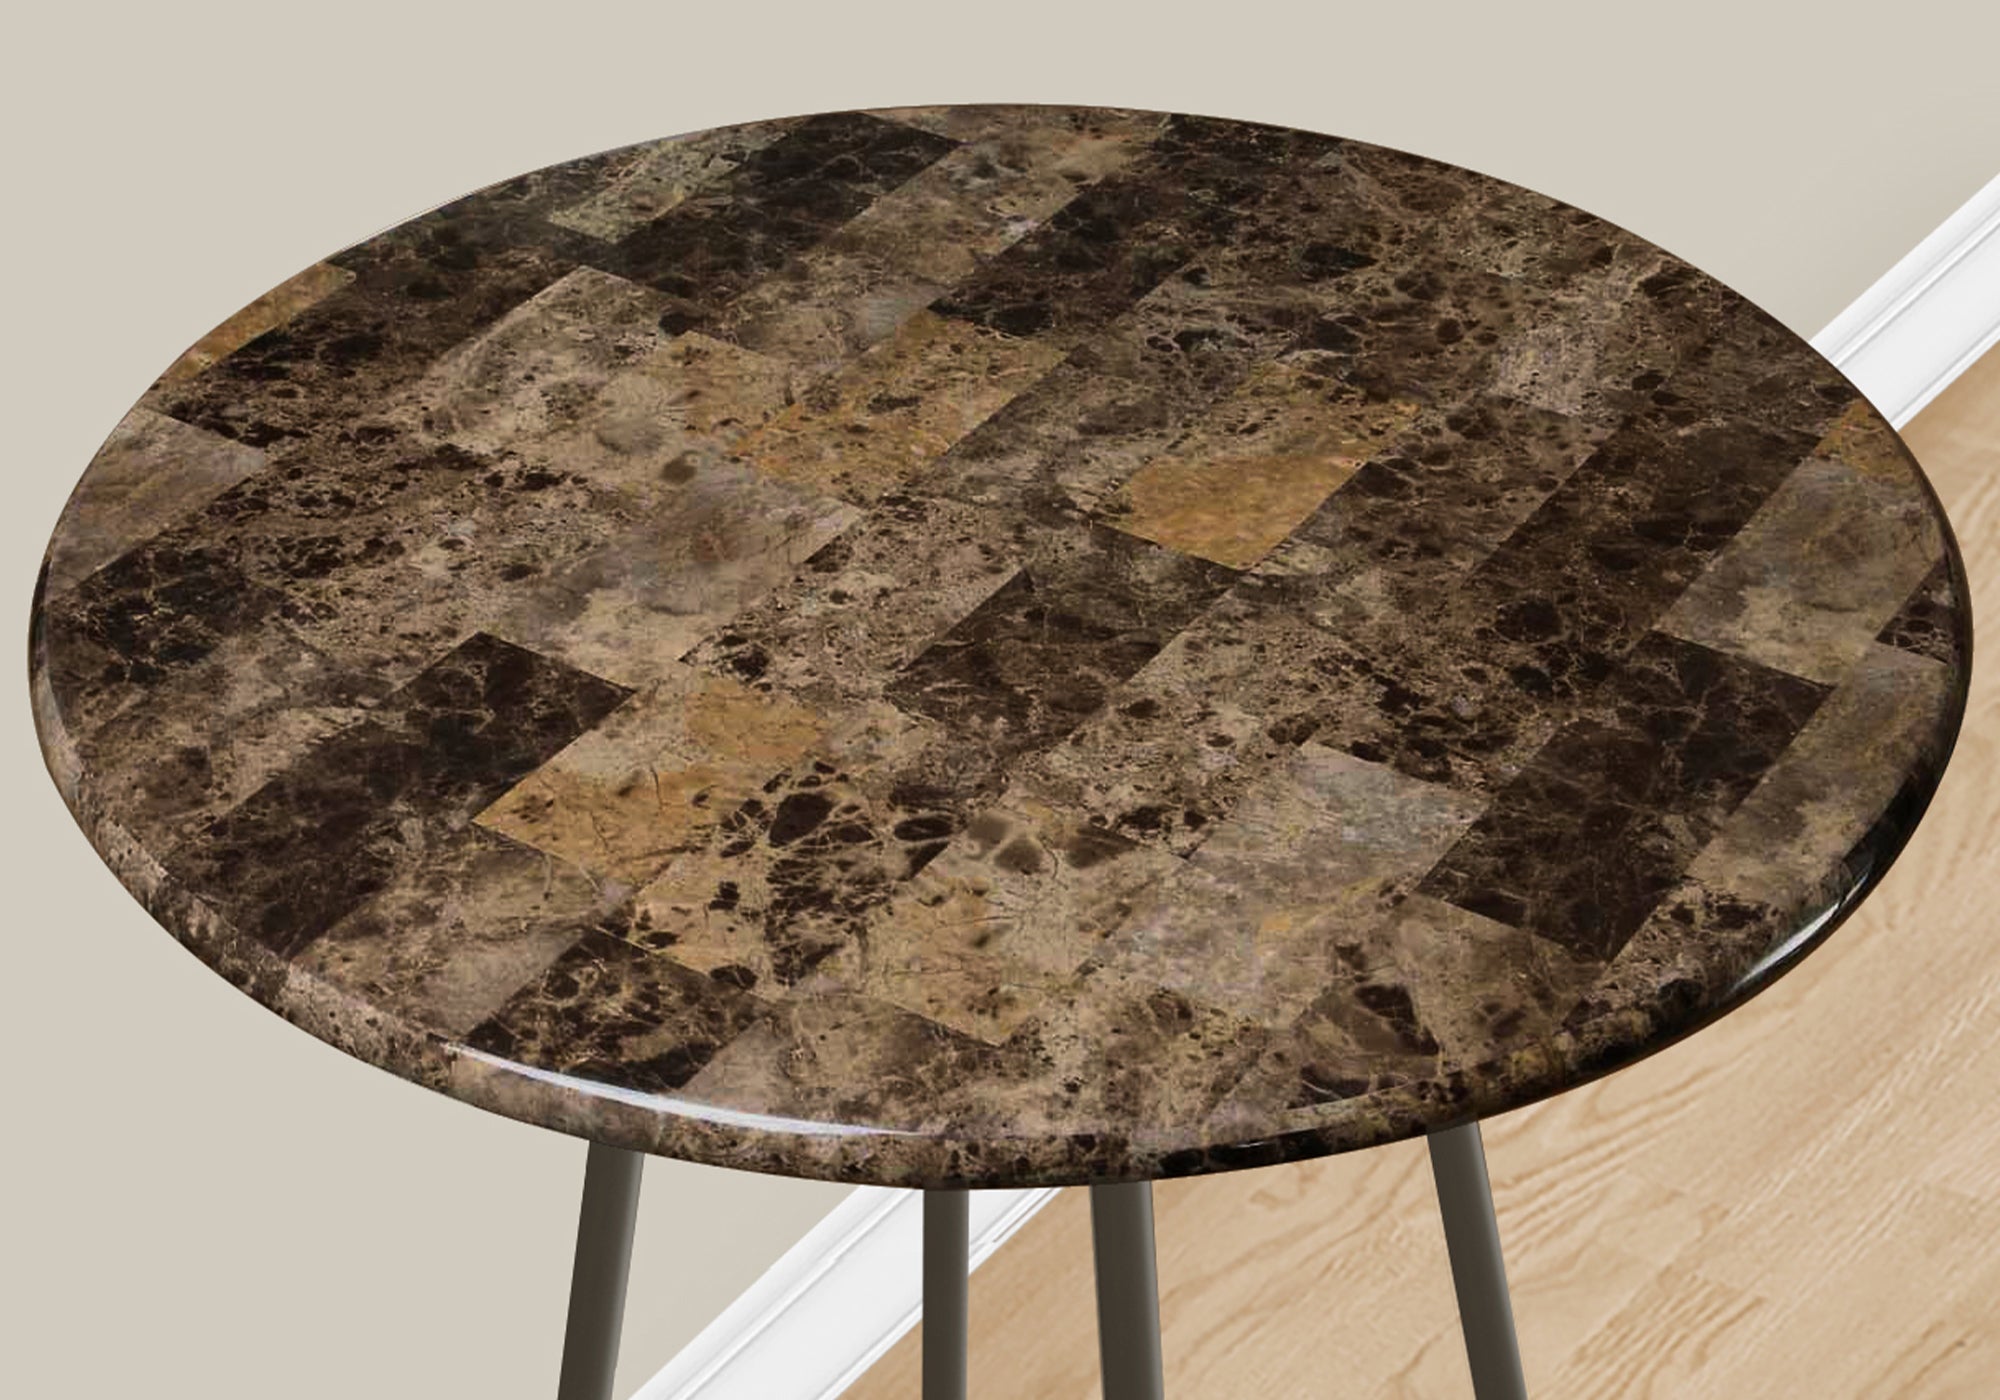 MN-722310    Home Bar, Bar Table, Bar Height, Pub Table, 30" Round, Small, Kitchen, Living Room, Metal, Laminate, Brown Marble Look, Bronze, Traditional